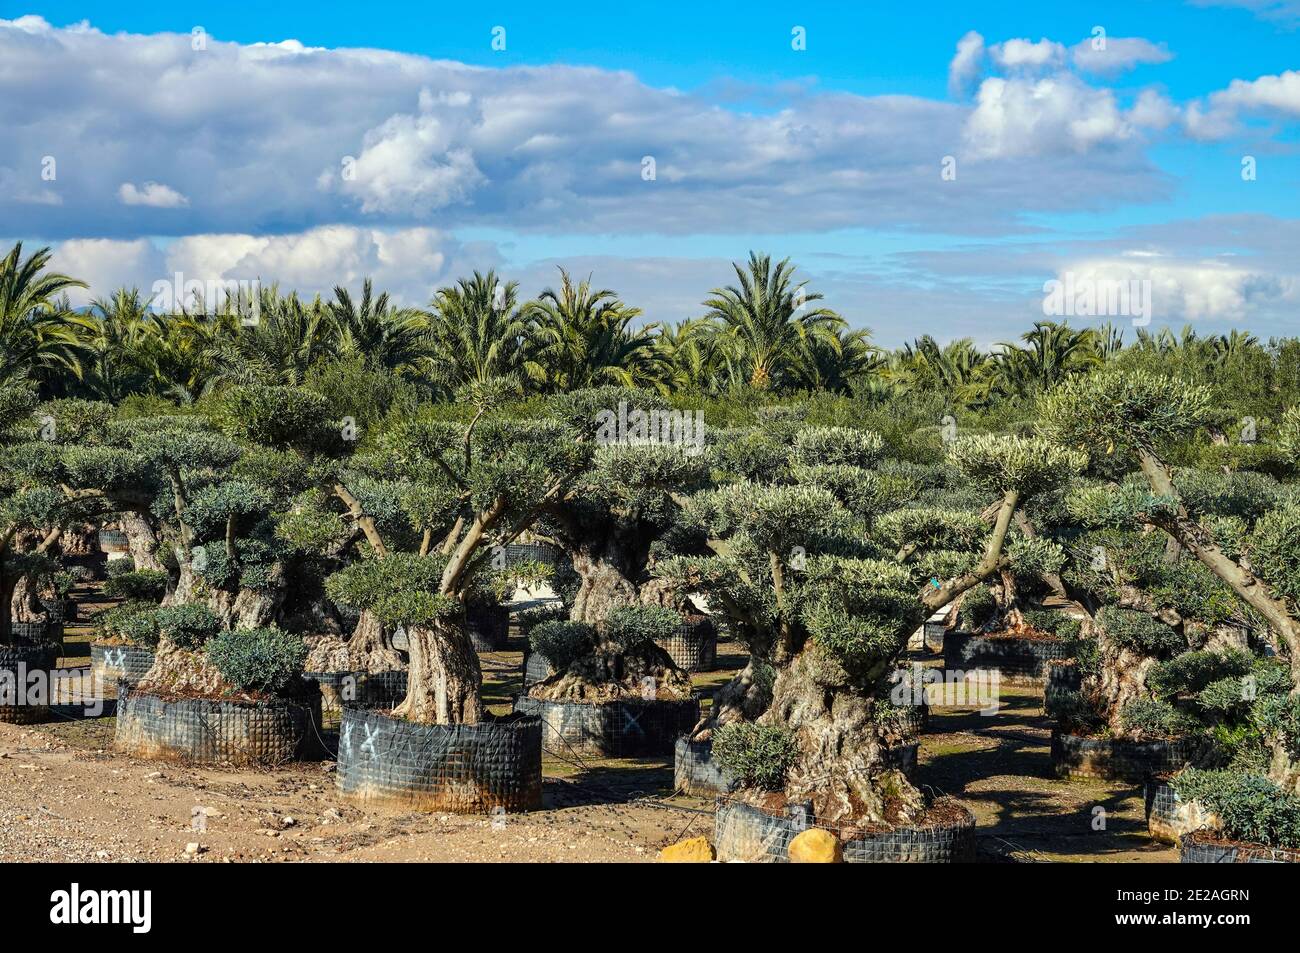 Nursery for growing olive trees in an extensive flat agricultural area, garden centre near Elche, Costa Blanca, Spain Stock Photo